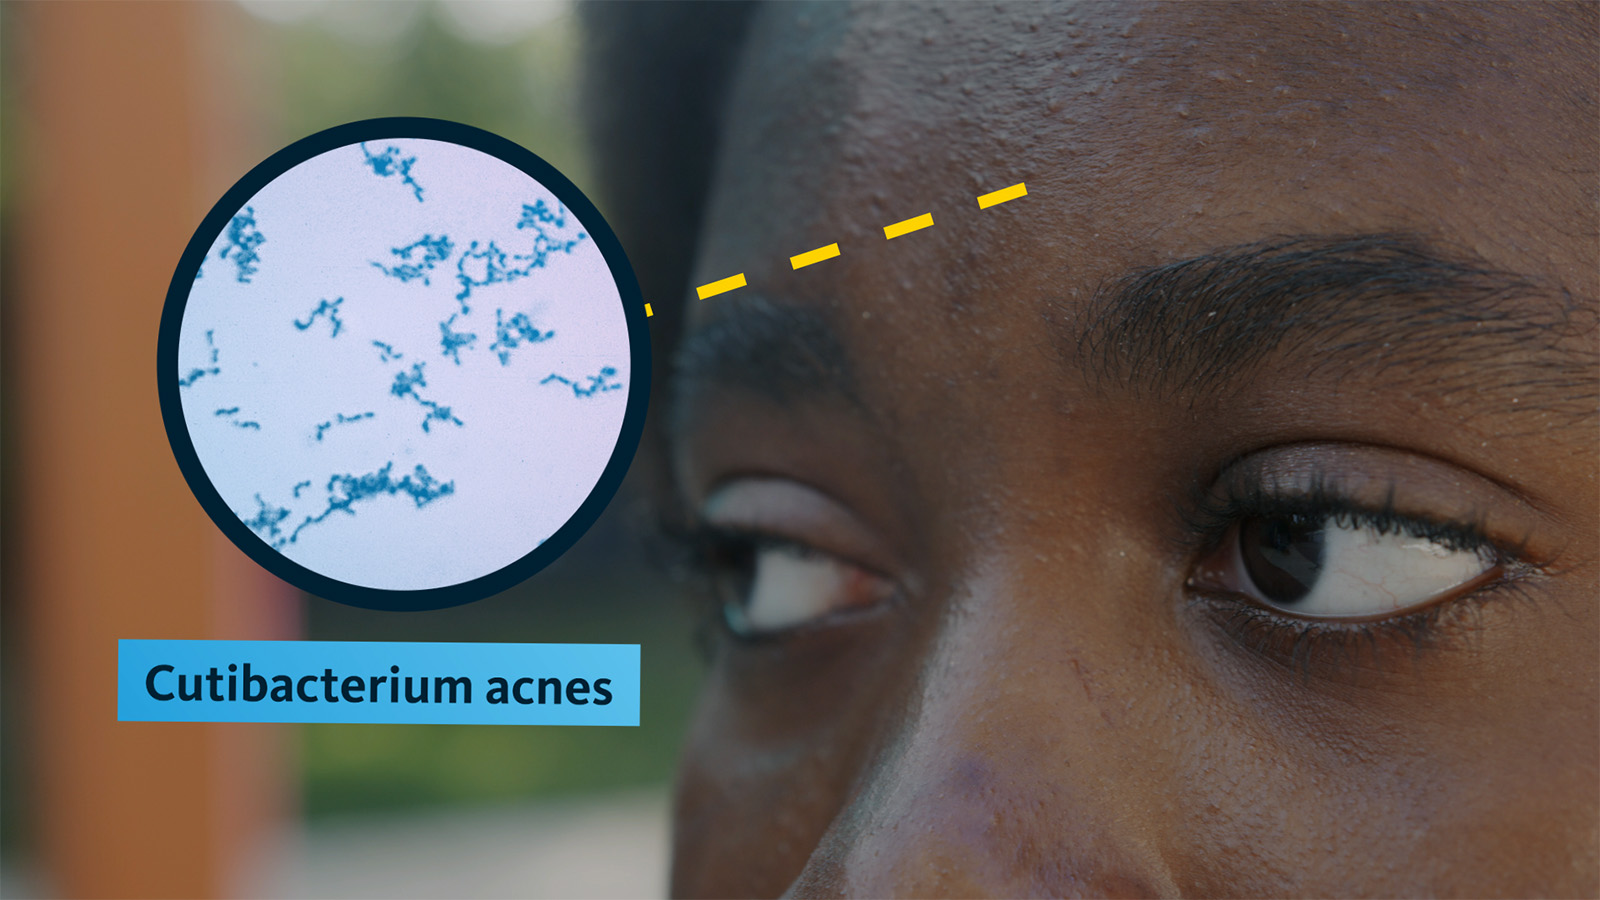 A close-up of a woman's forehead with an illustration showing a microscopic image labeled "Cutibacterium acnes"